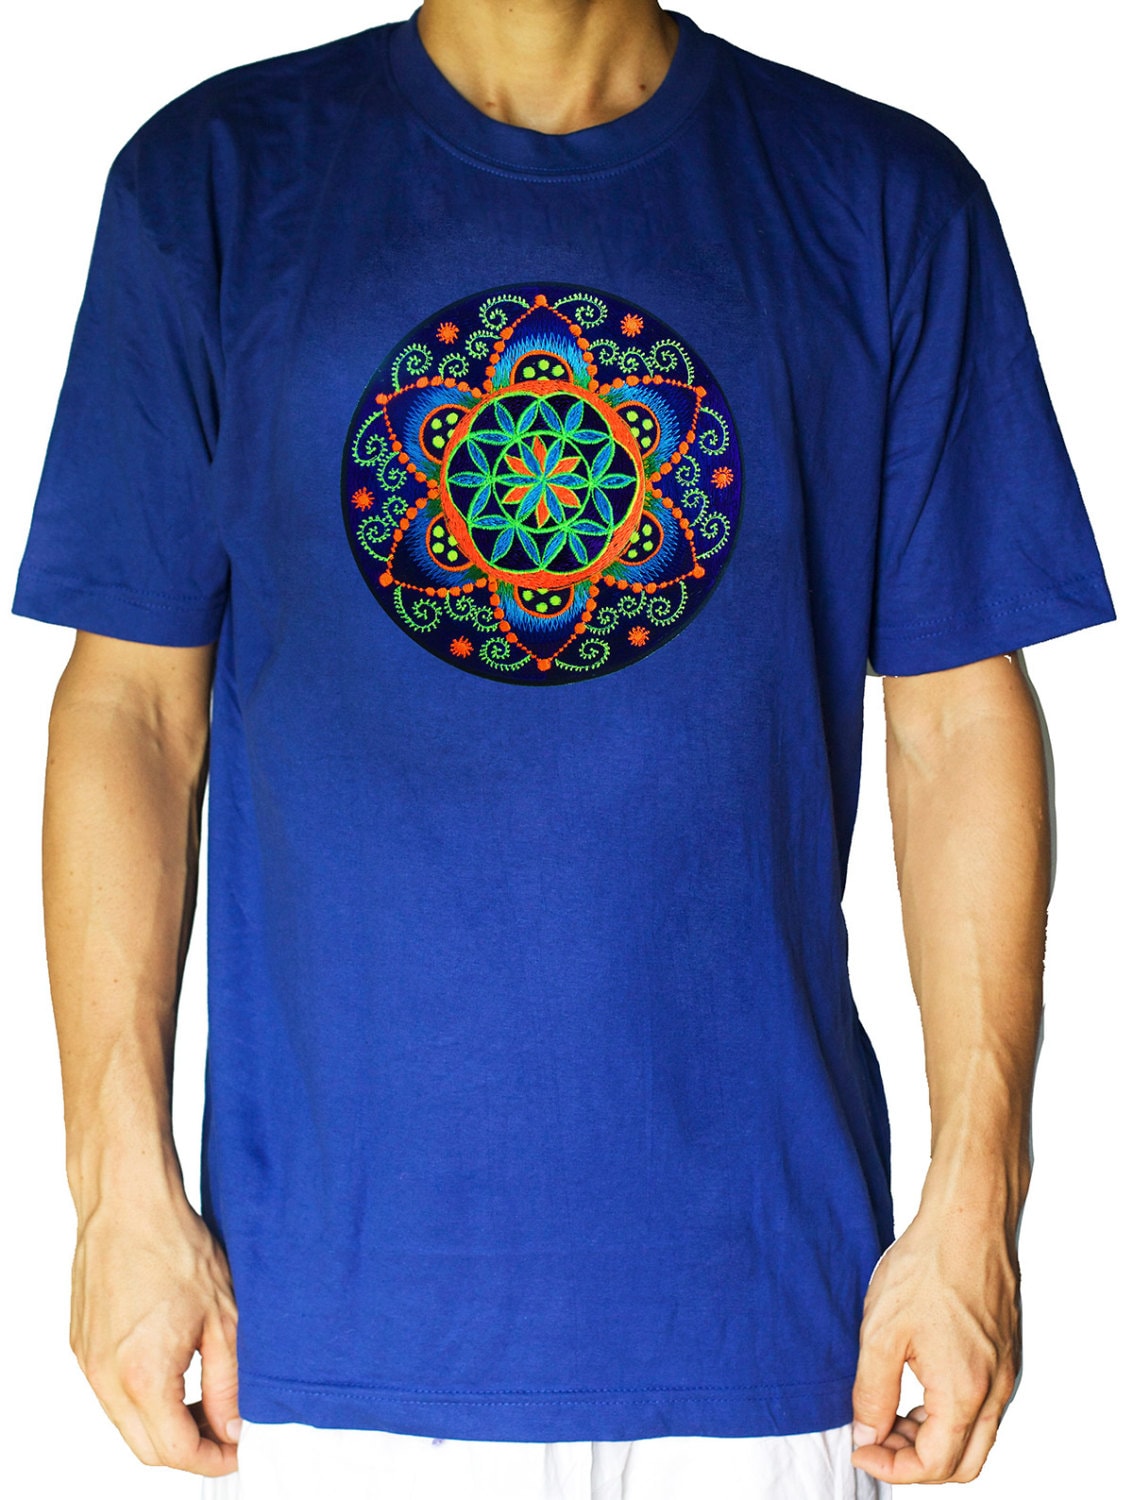 fractal Seed of Life shirt crop circle - sacred geometry flower of life drunvalo melchizedek handmade - choose any colour and size